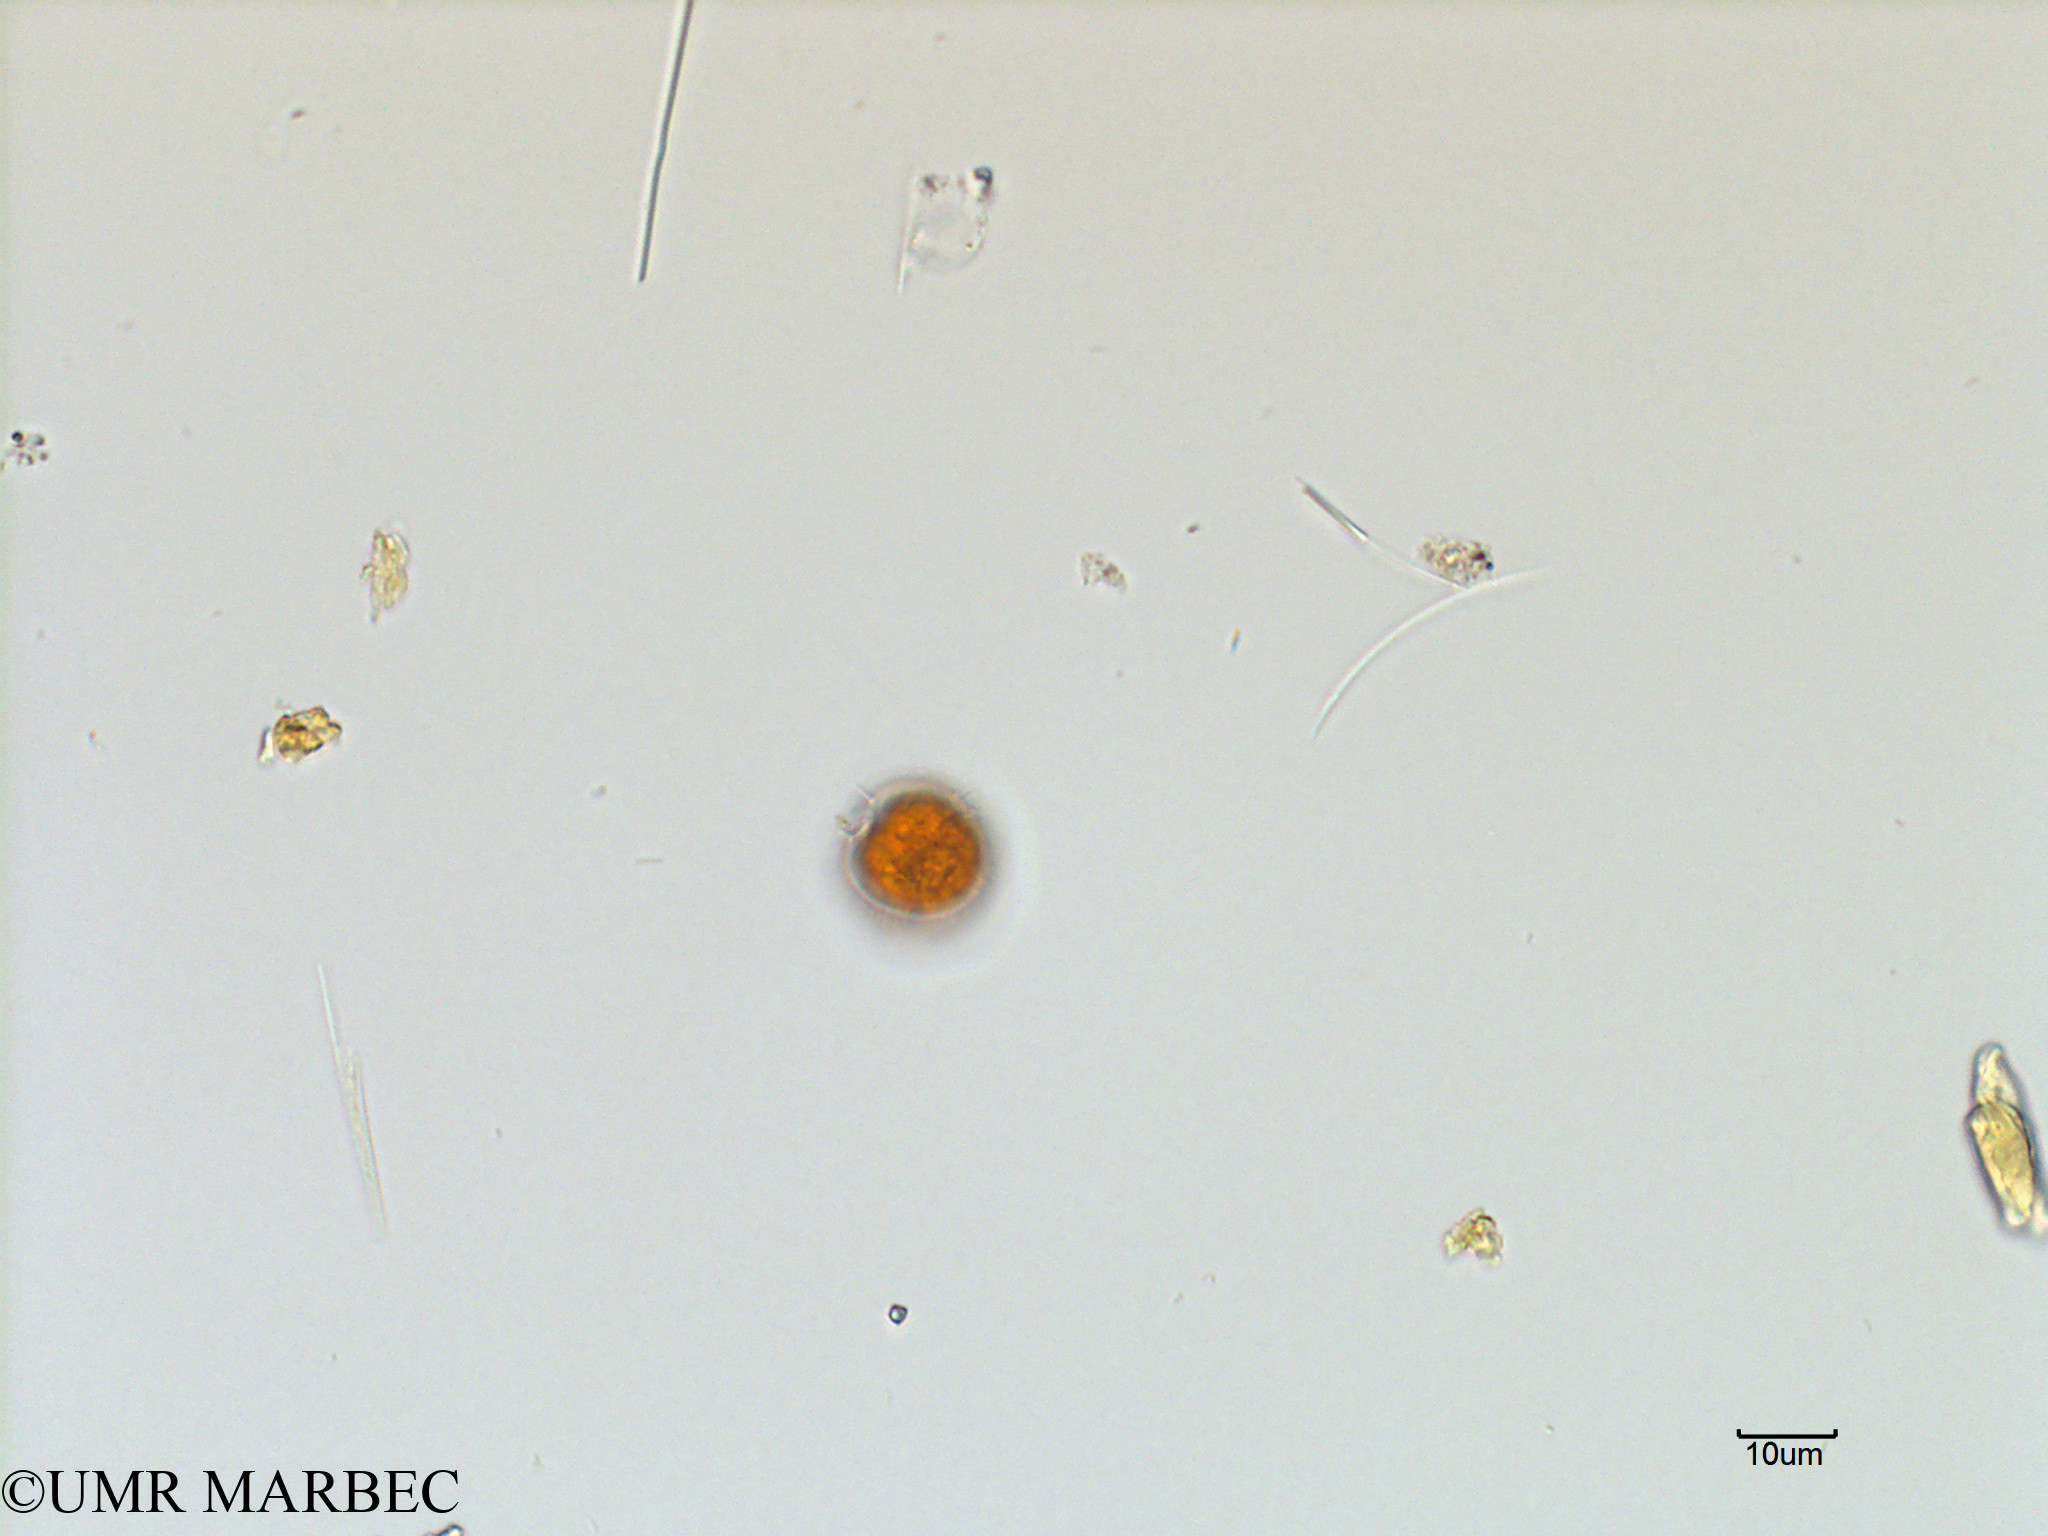 phyto/Scattered_Islands/mayotte_lagoon/SIREME May 2016/Protoperidinium sp52 (MAY3_oblea 1-6).tif(copy).jpg